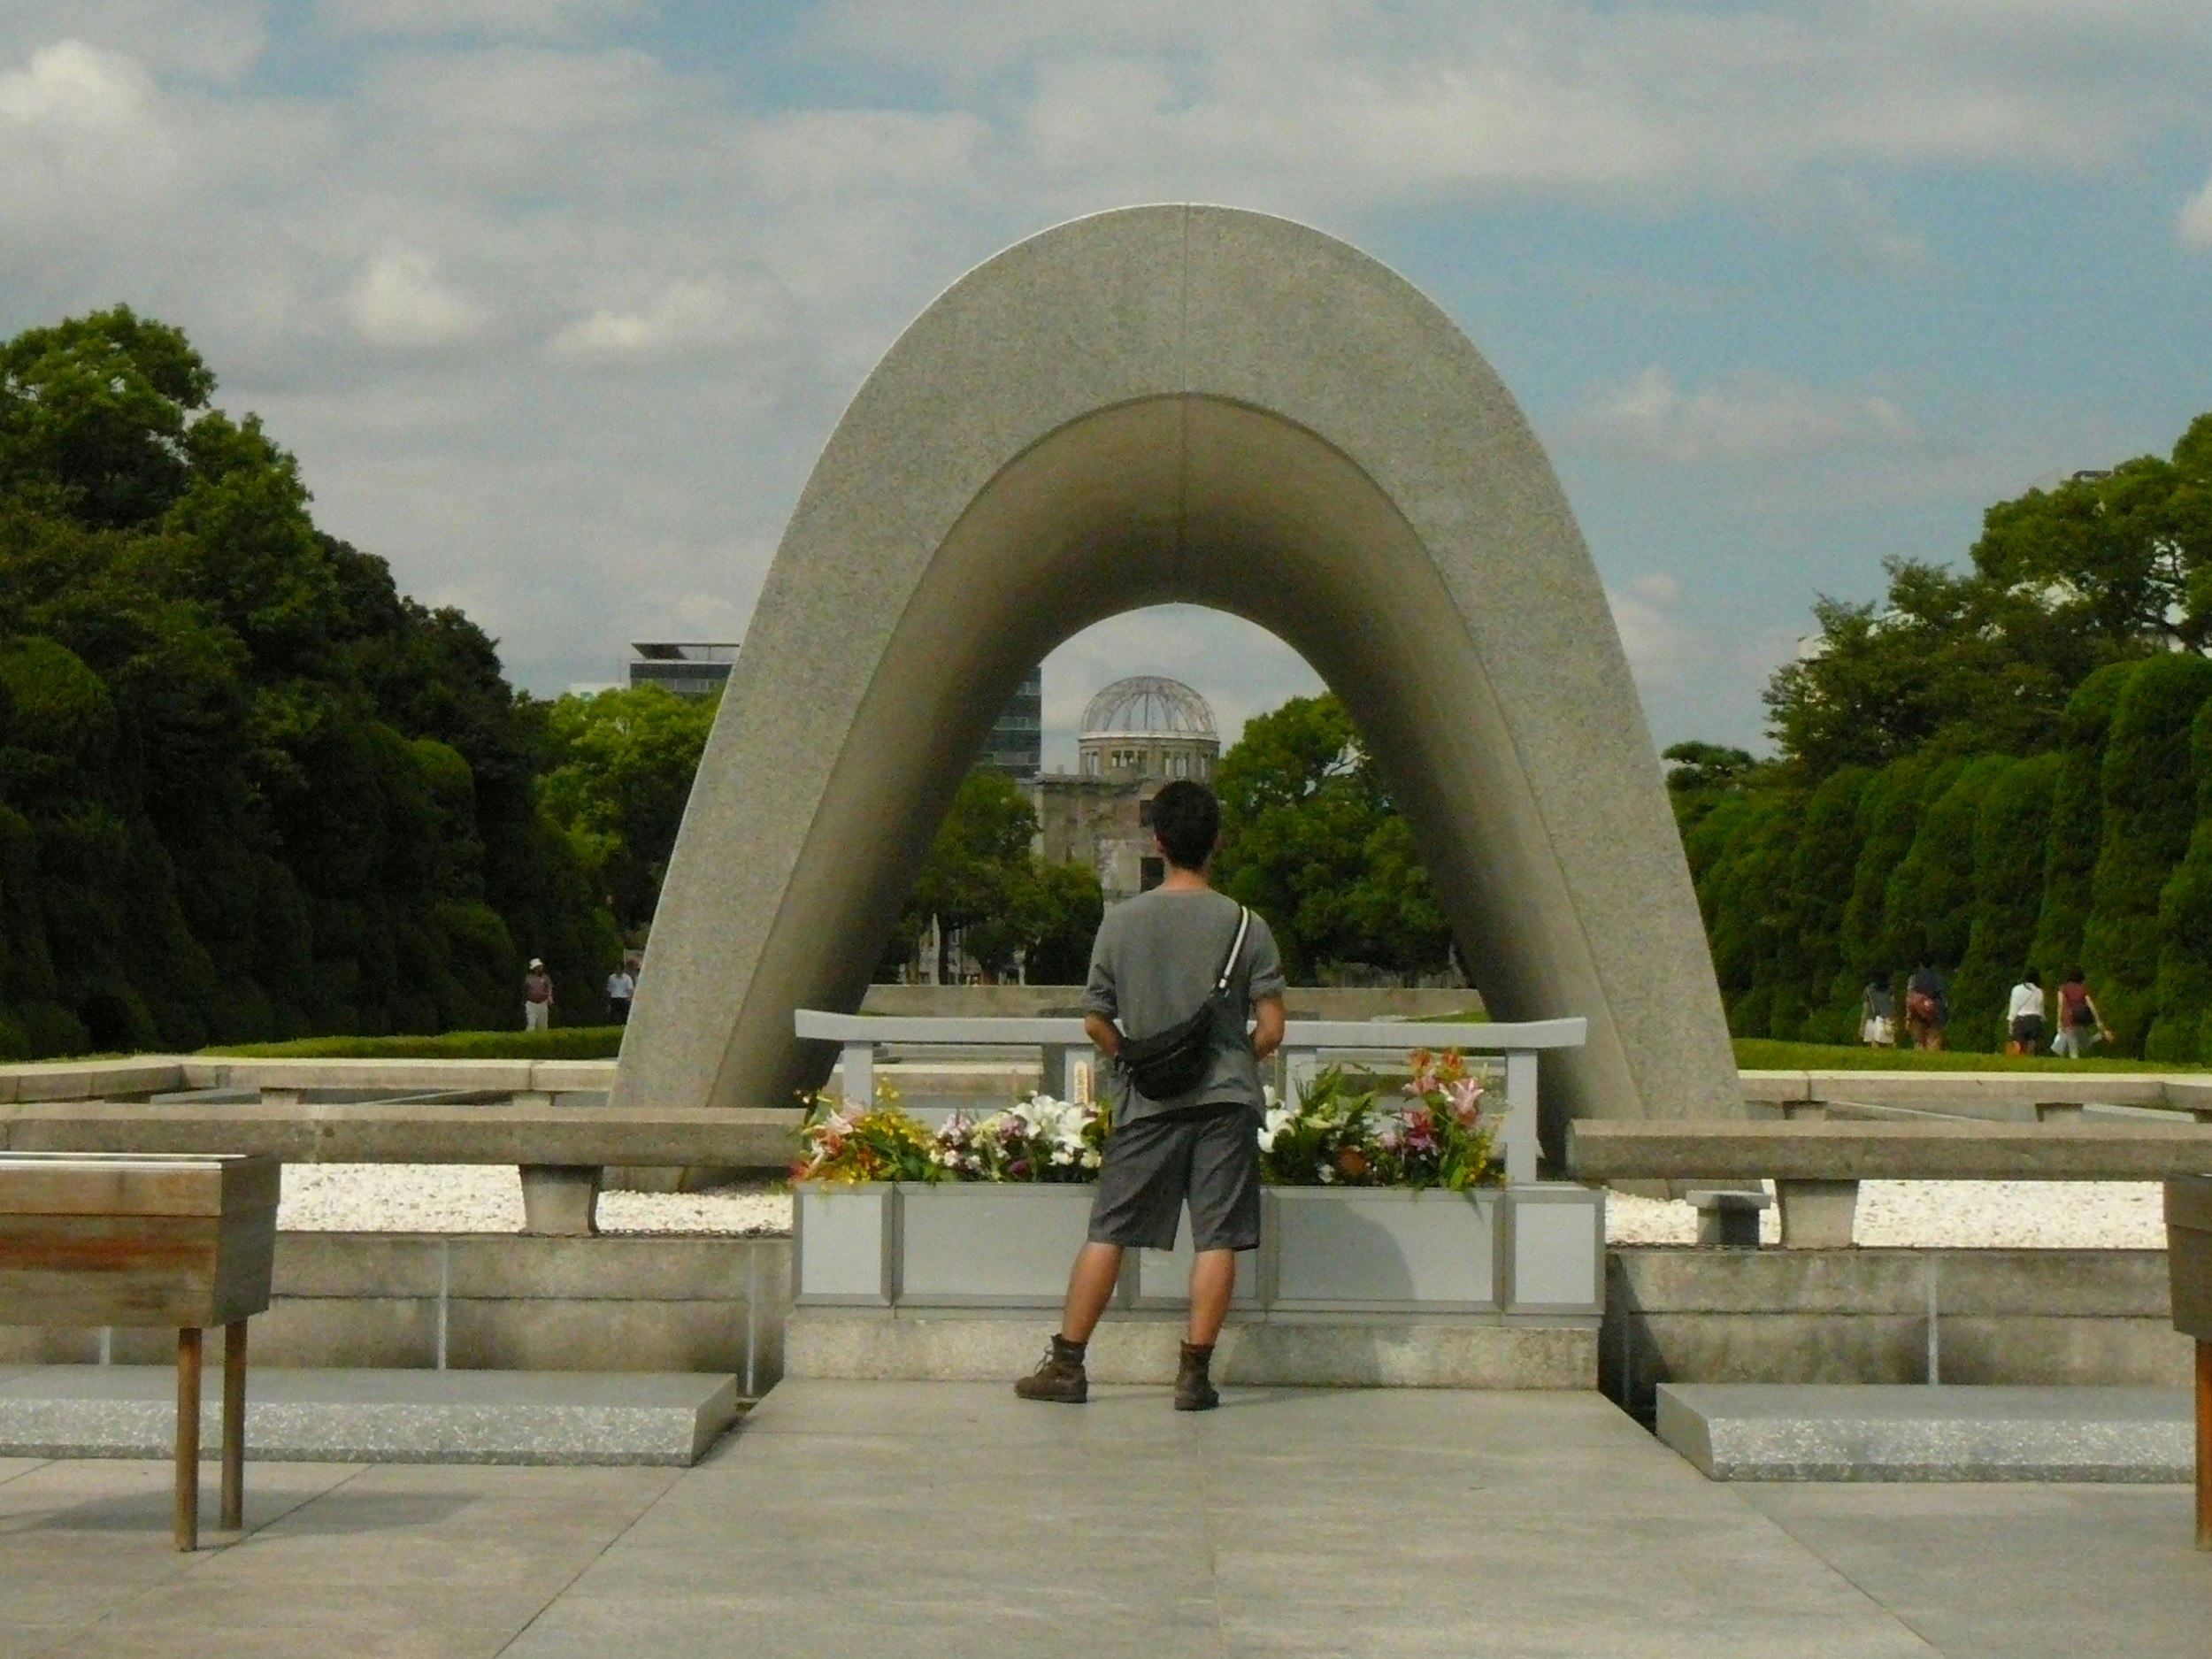 A man stands alone under an archway in a park. In the distance through the arch is what's left of the dome damaged by the Hiroshima nuclear bomb.